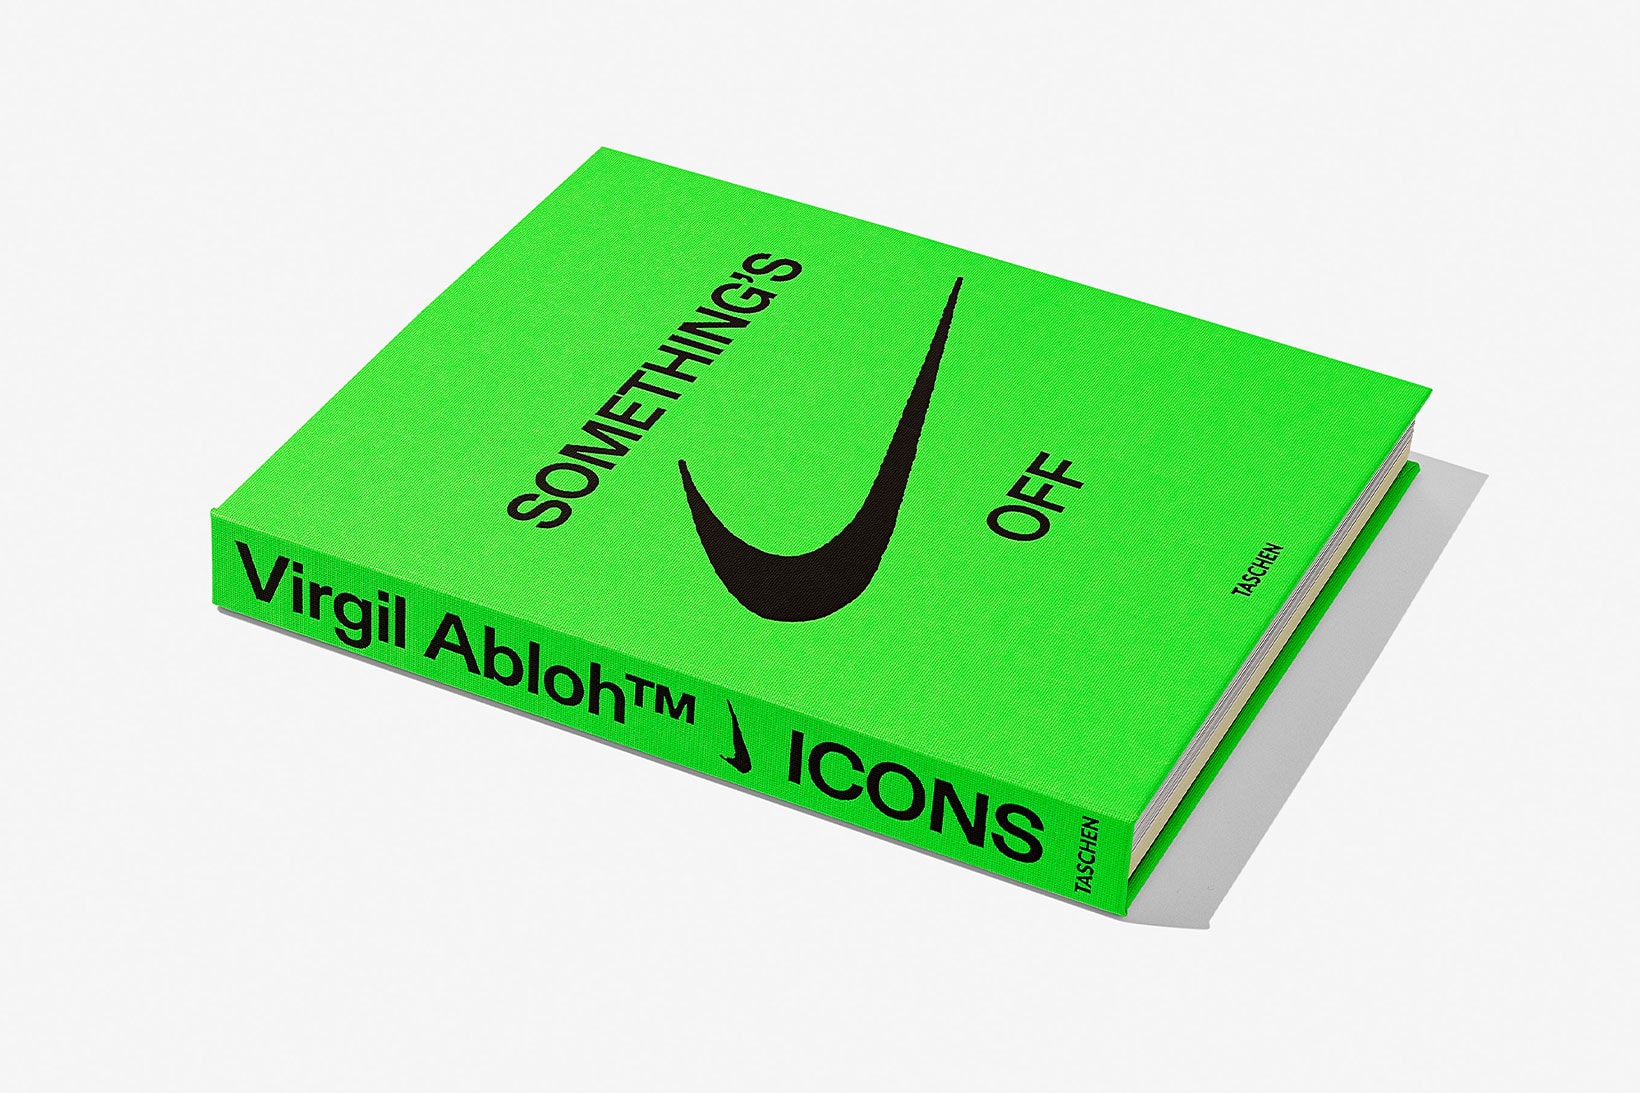 virgil abloh nike icons book retrospective collaboration taschen off-white neon green details something's off